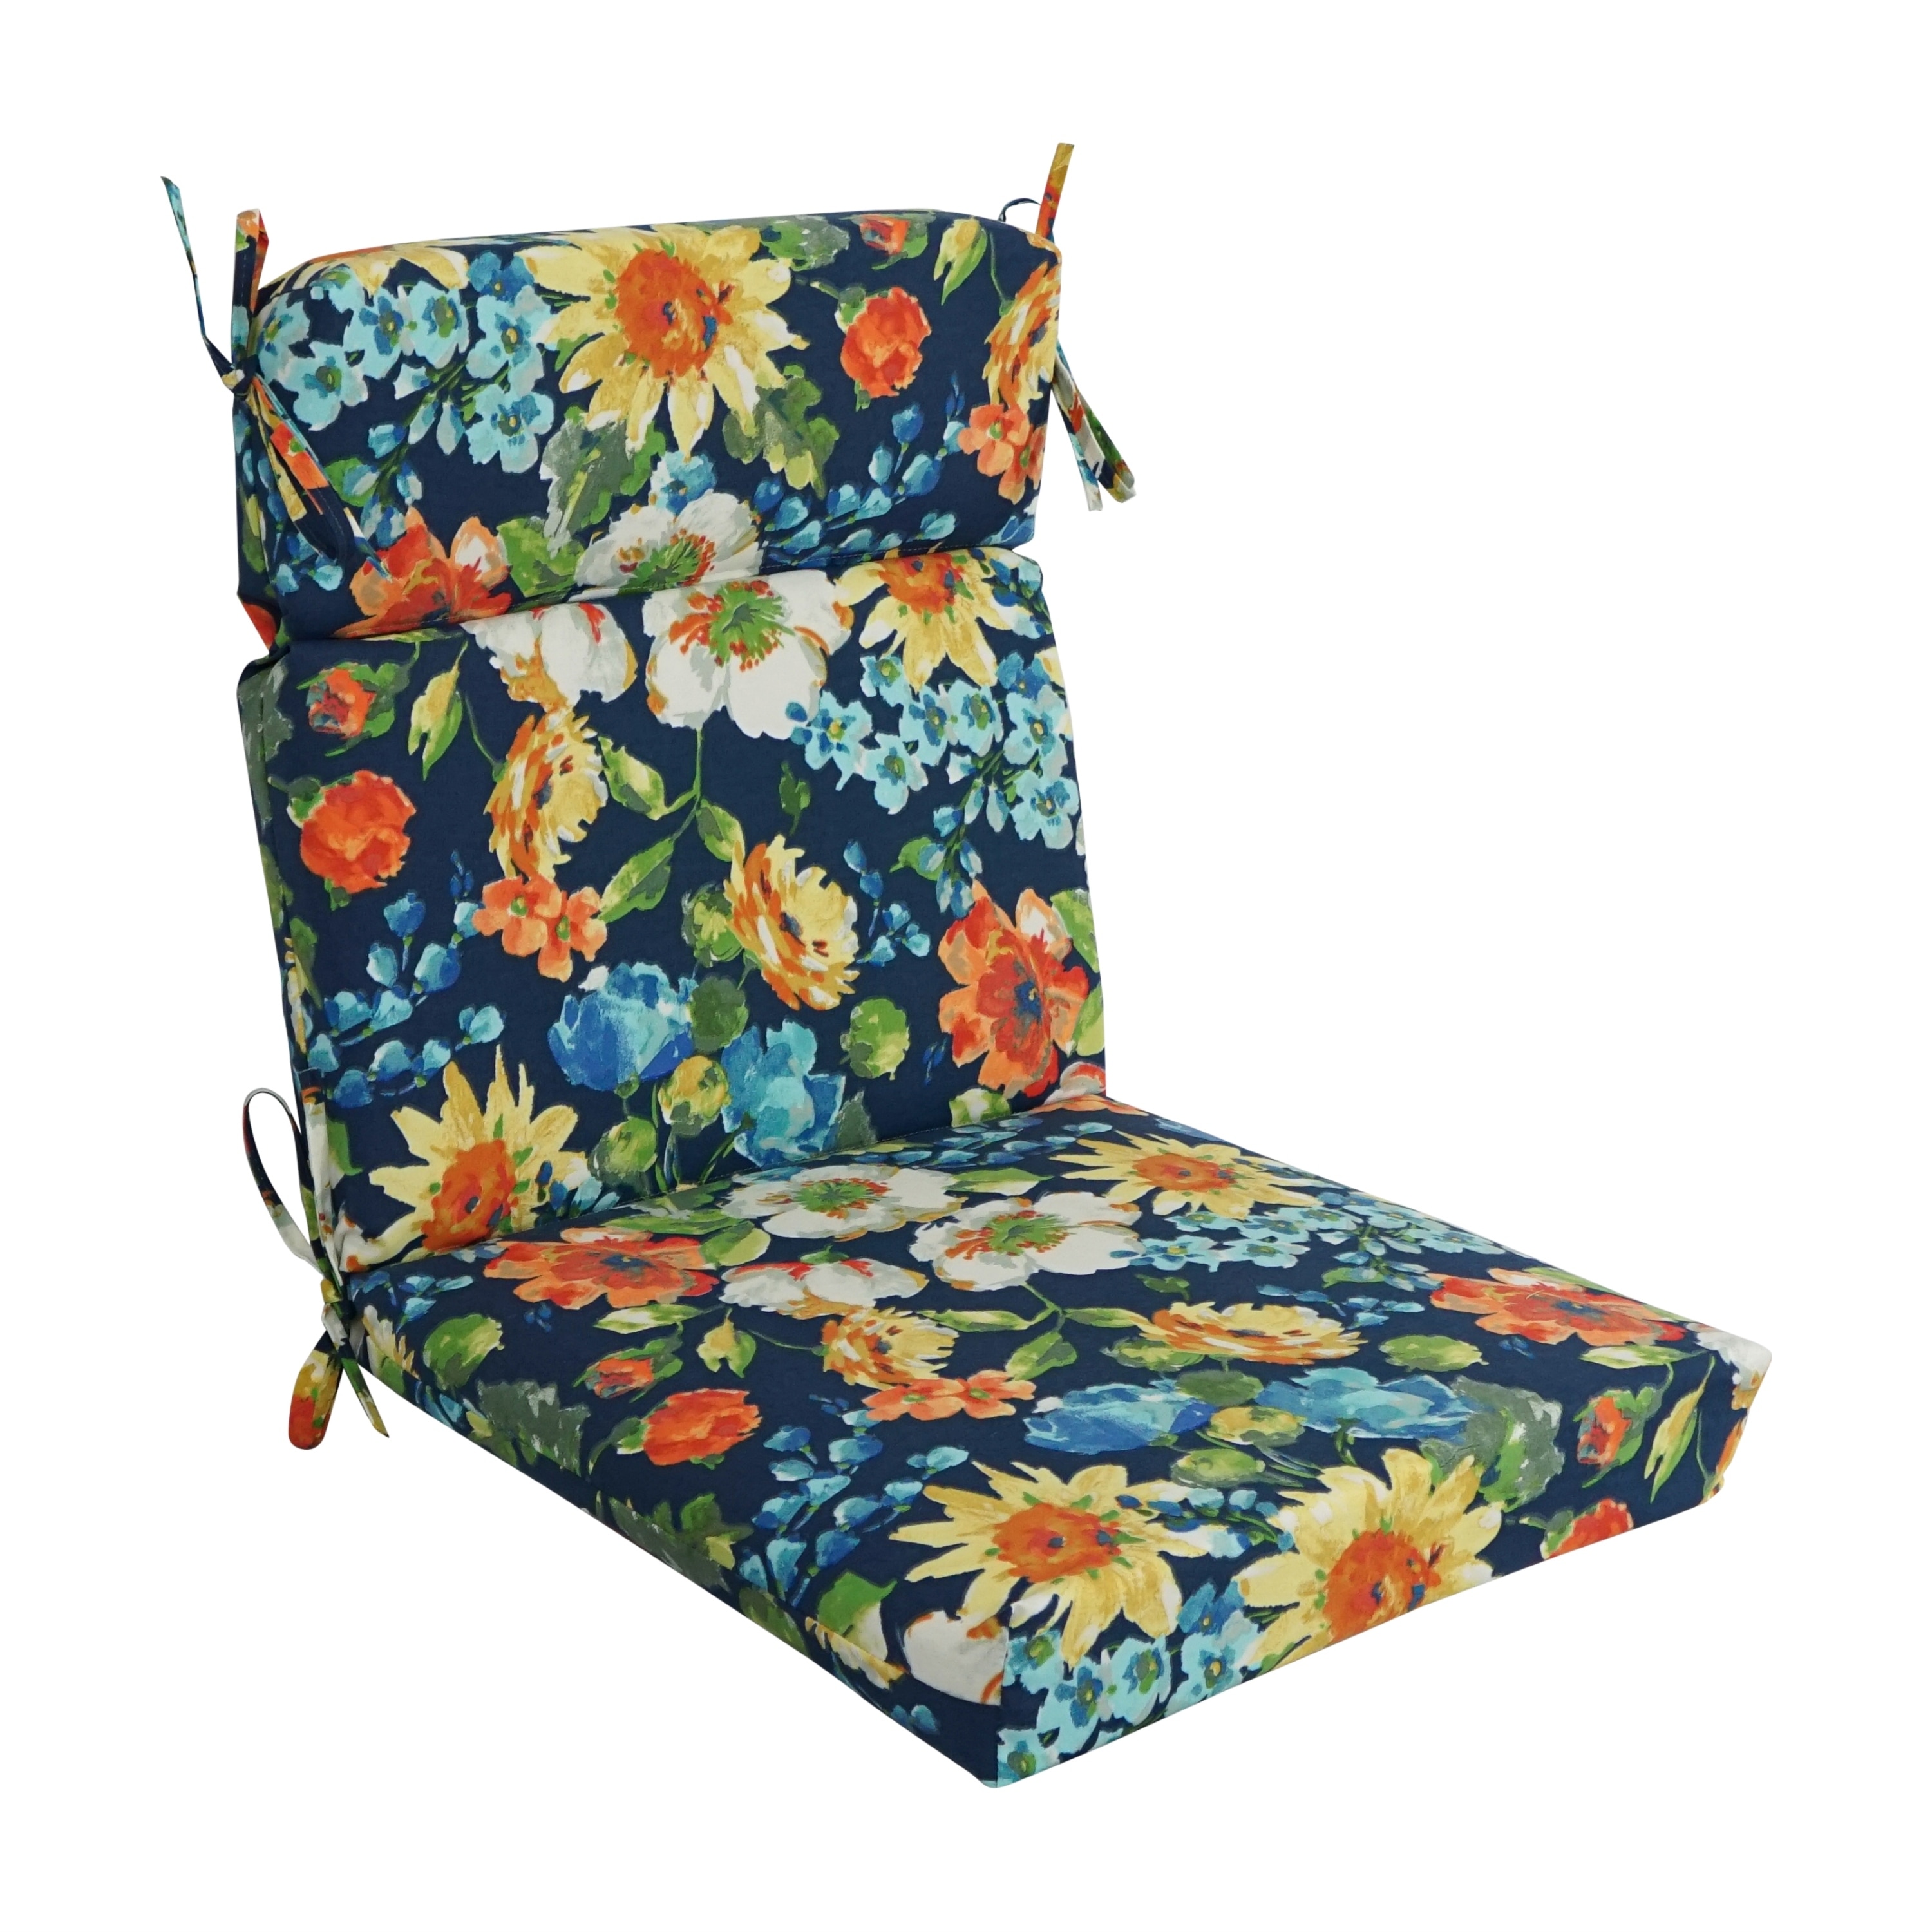 https://ak1.ostkcdn.com/images/products/is/images/direct/6c42f458c48347fce96bda44574a872efb15ffd2/Blazing-Needles-20-X-42-Indoor-Outdoor-Chair-Cushion.jpg